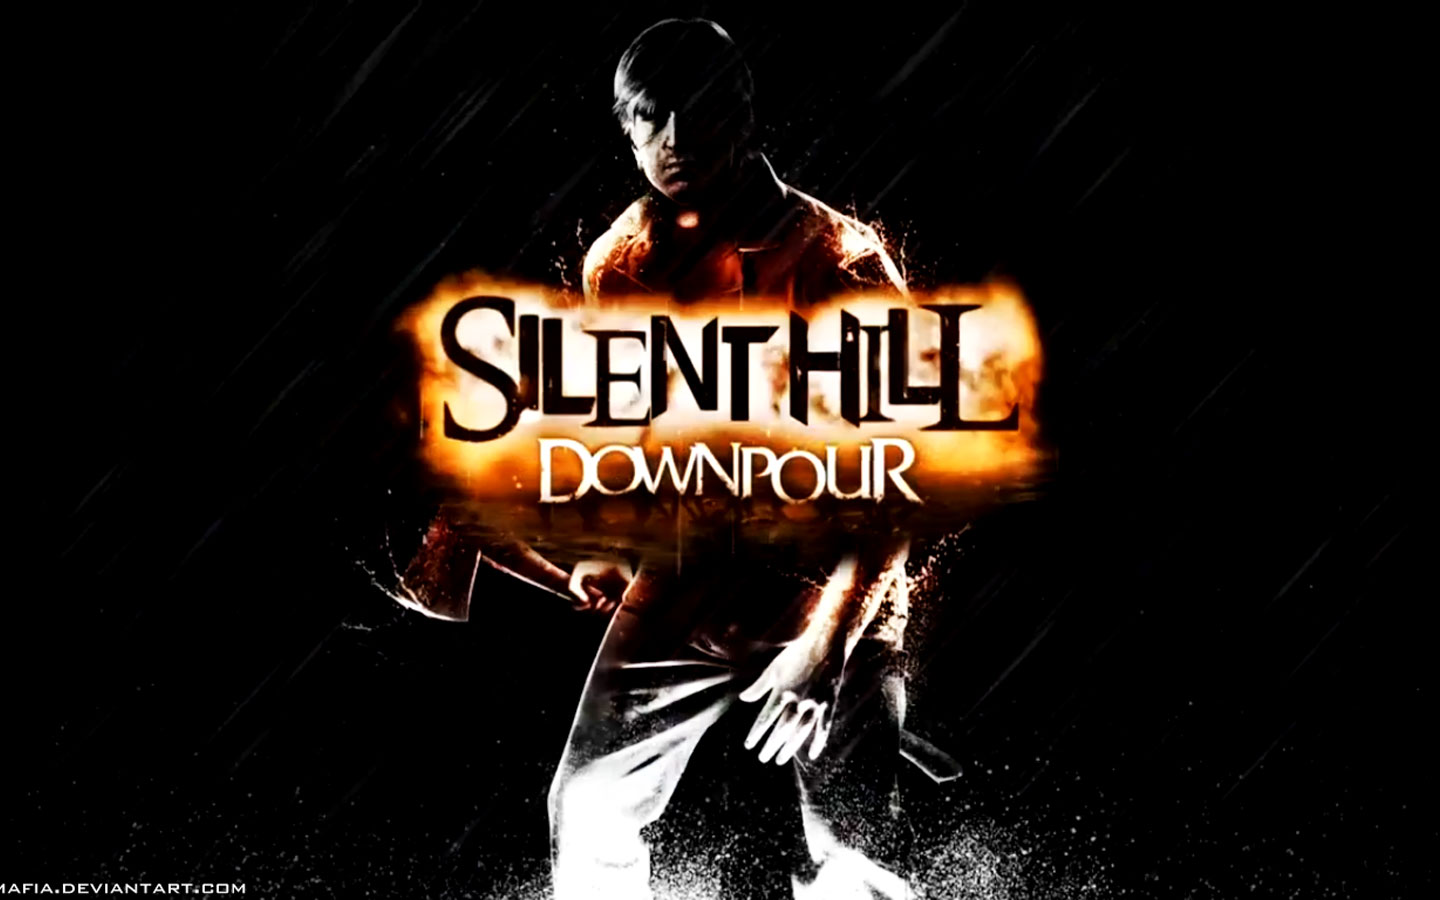 Silent hill downpour стим фото 31